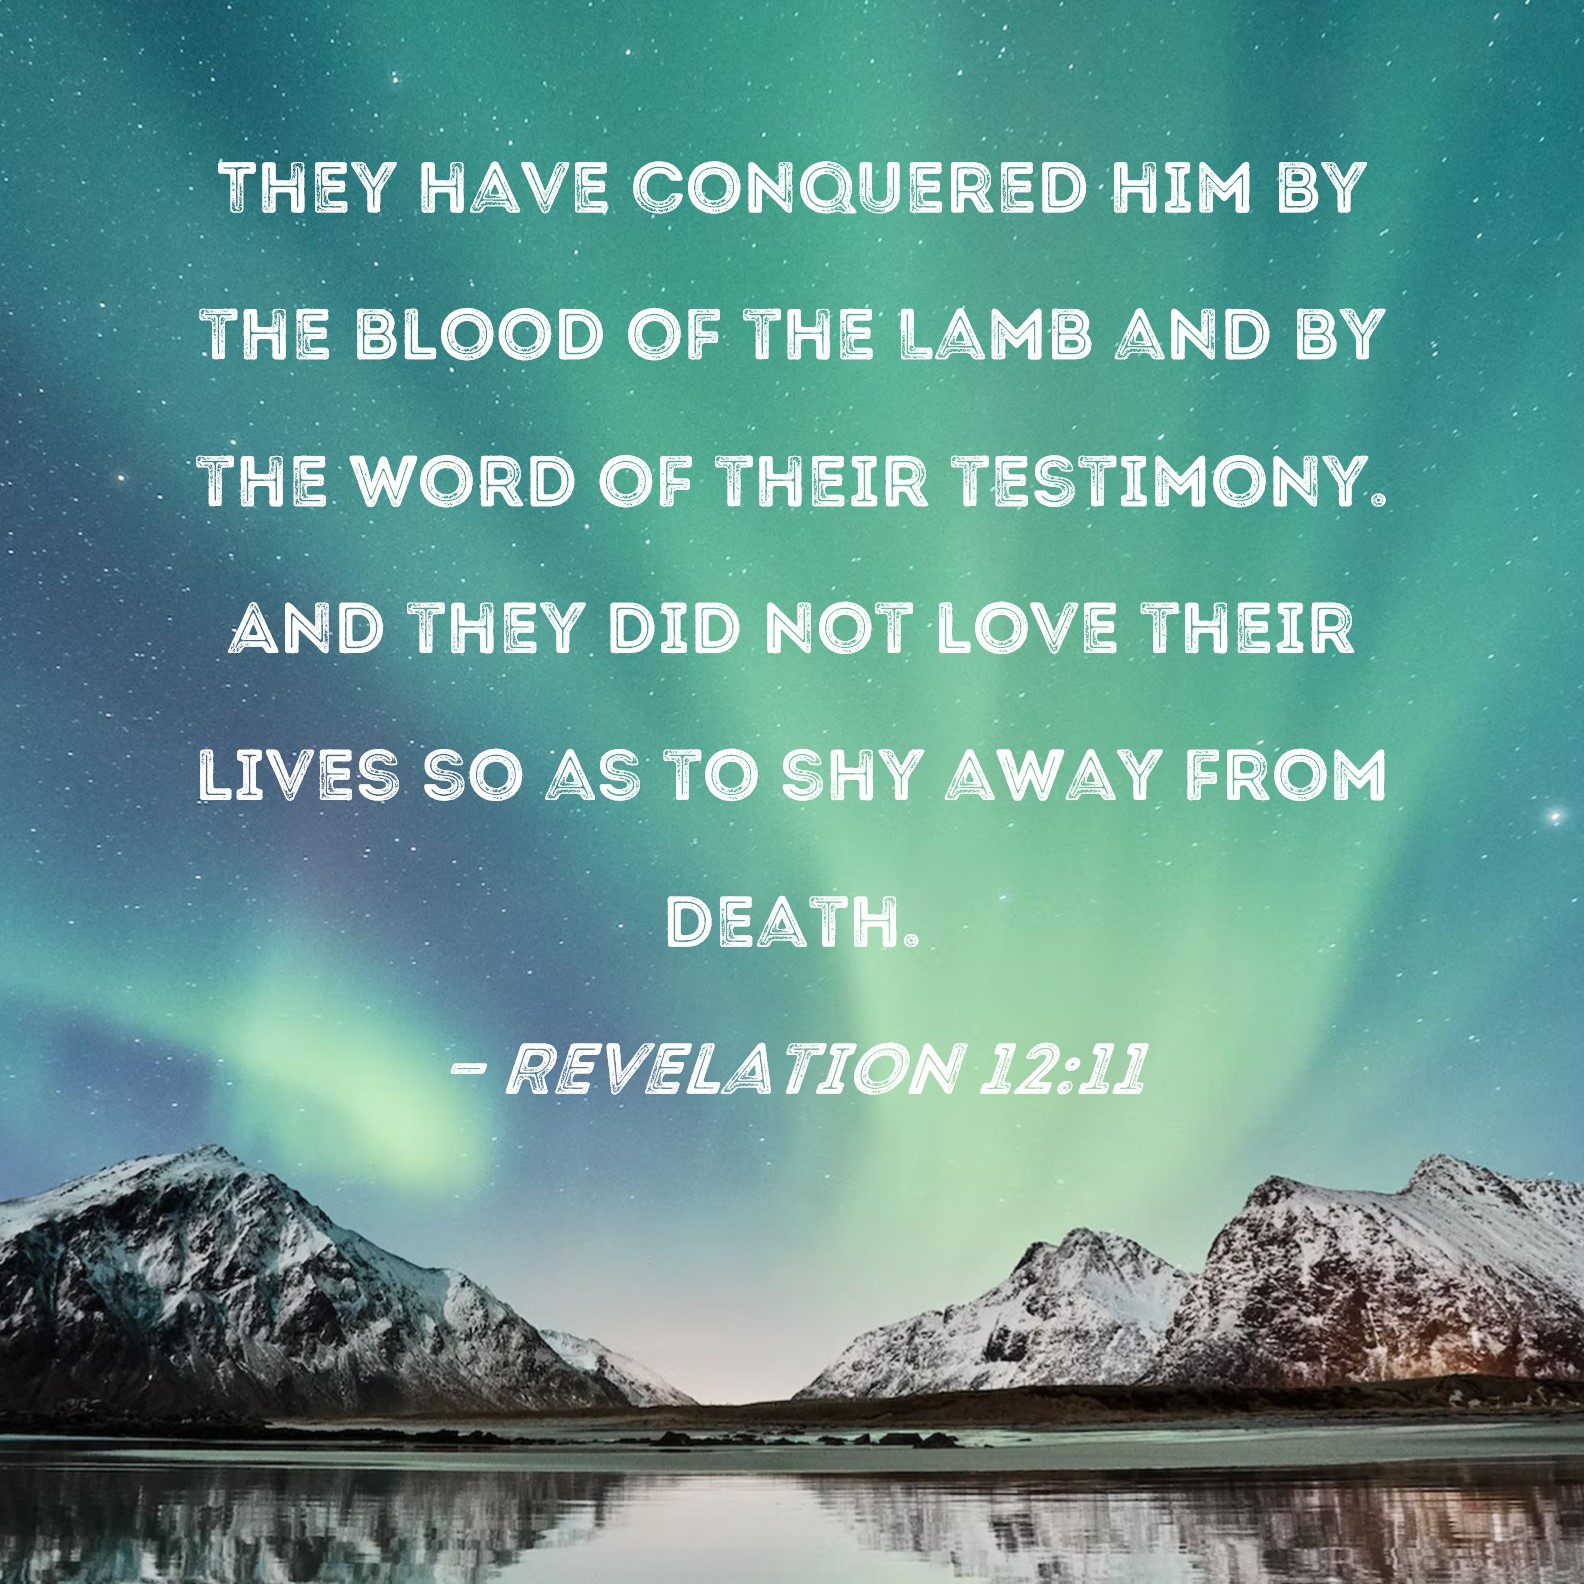 Revelation 12:11 They have conquered him by the blood of the Lamb and by  the word of their testimony. And they did not love their lives so as to shy  away from